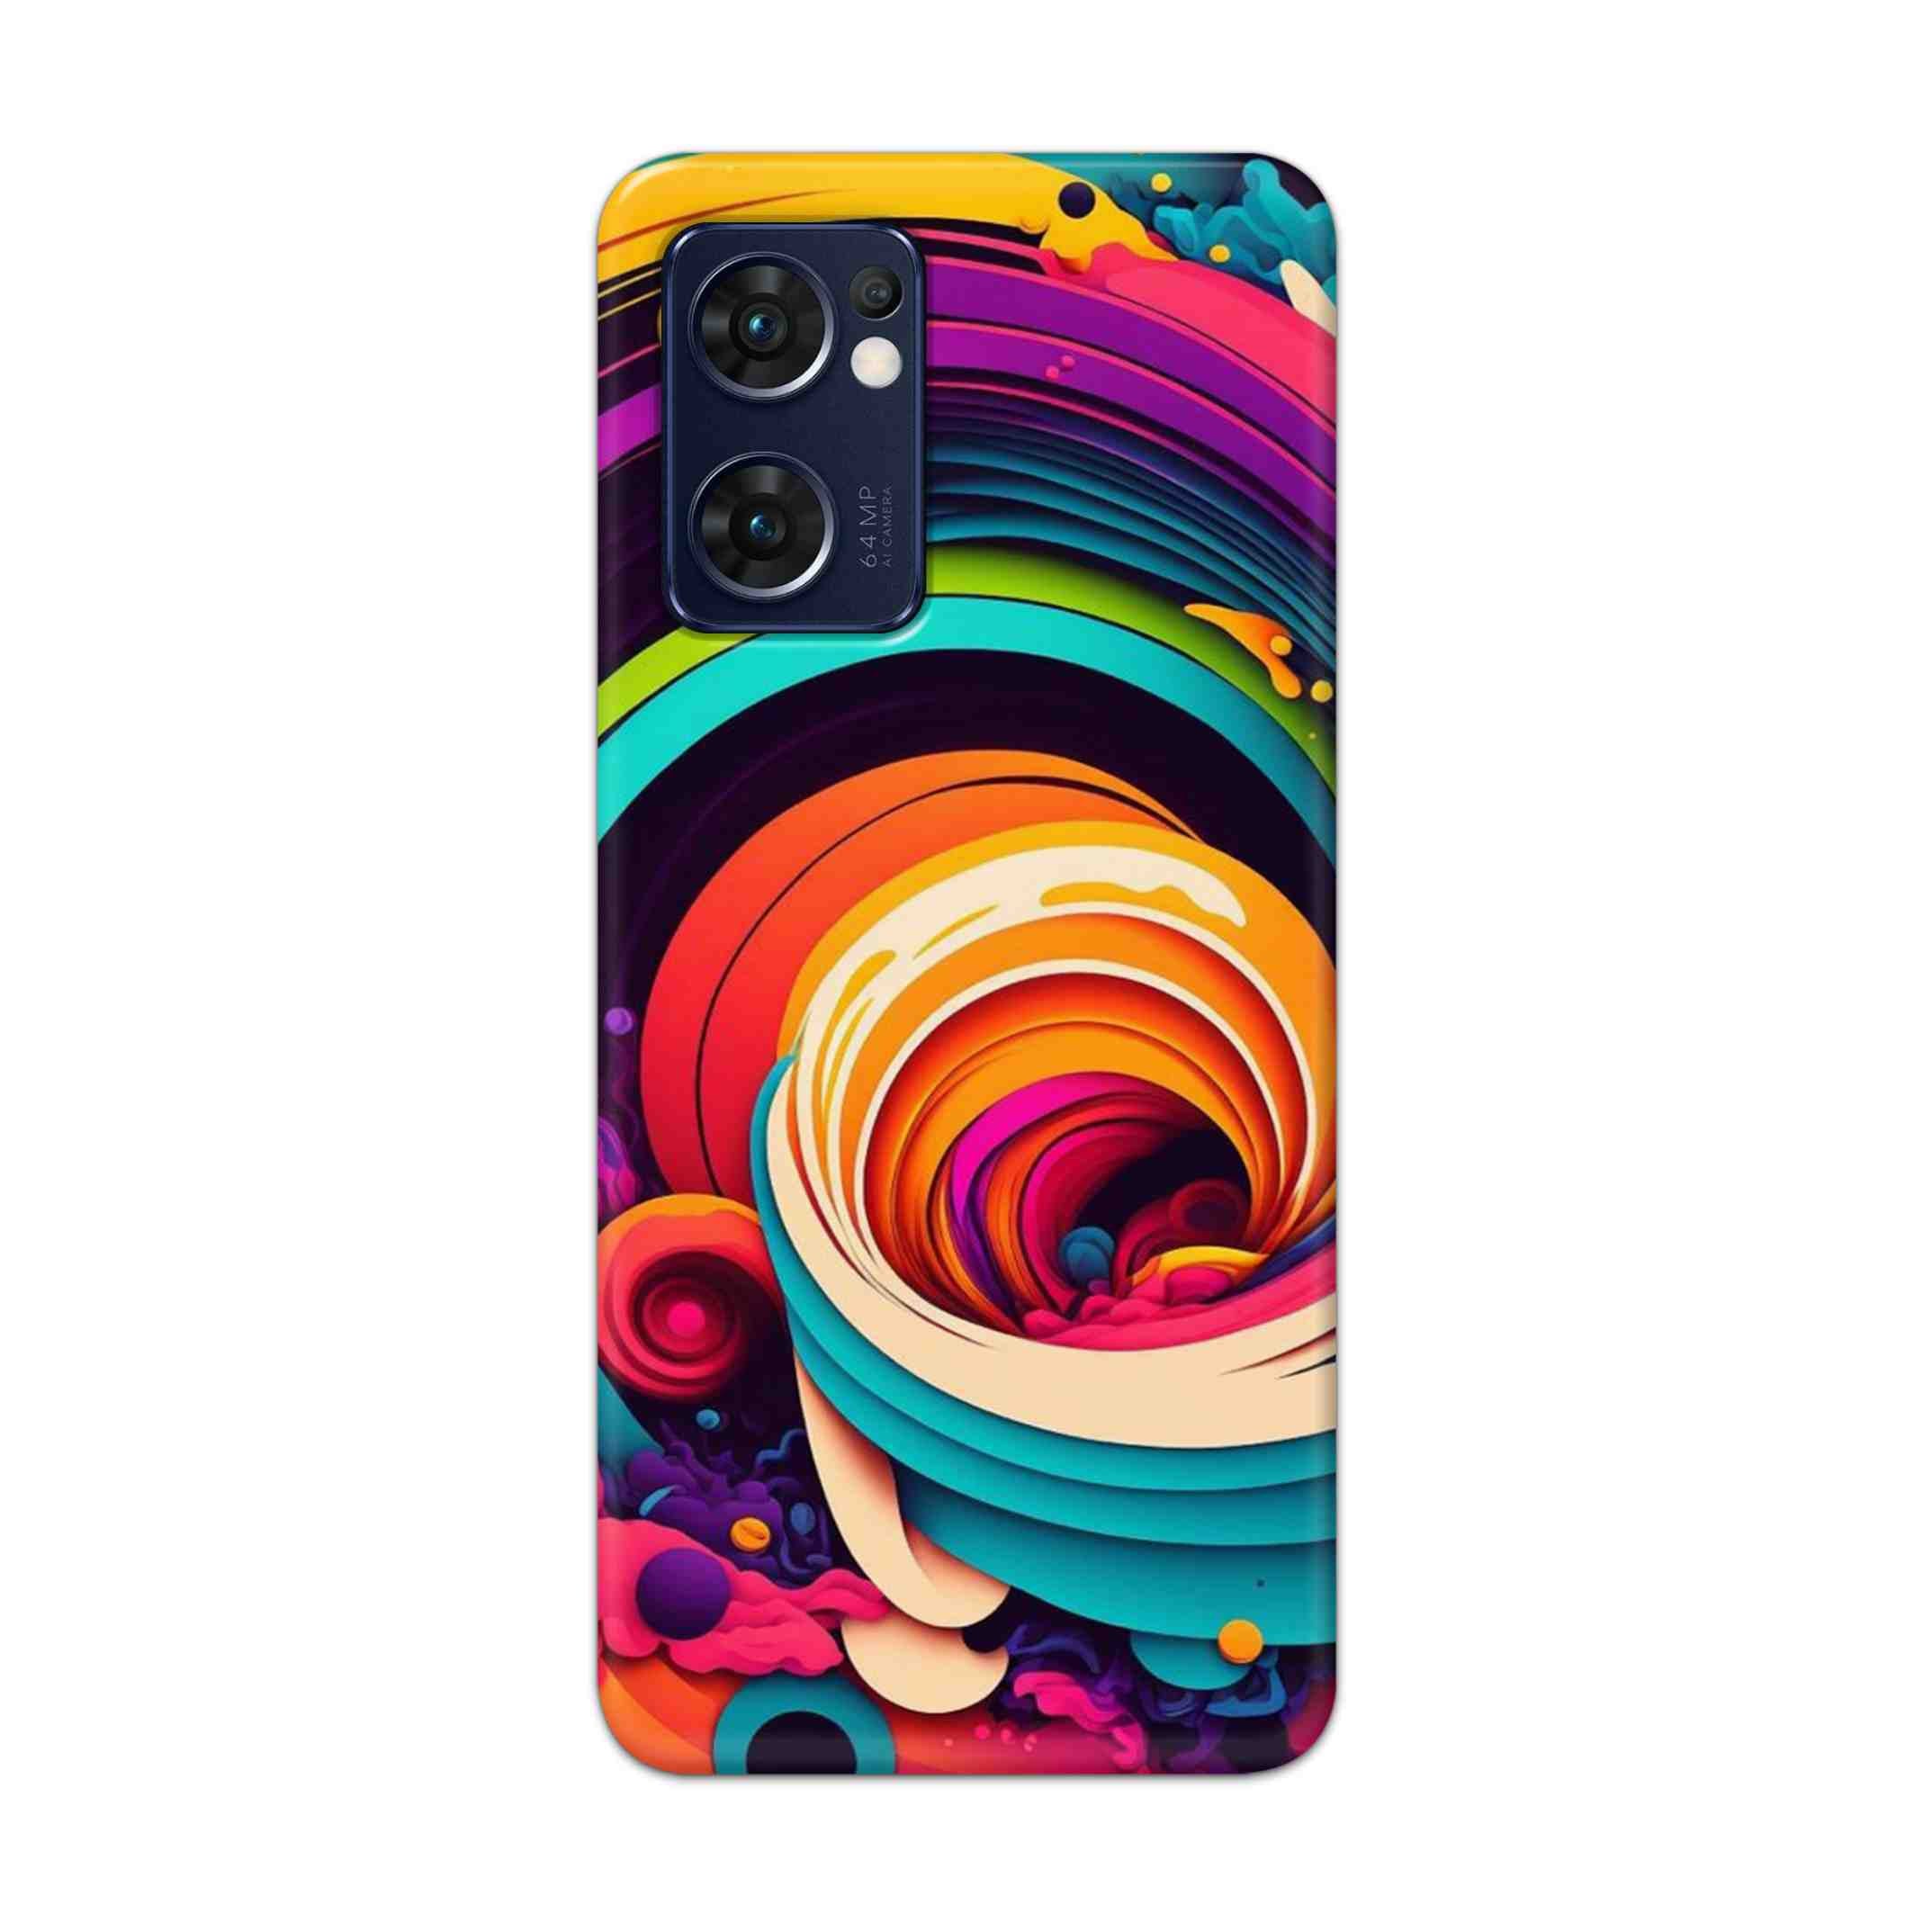 Buy Colour Circle Hard Back Mobile Phone Case Cover For Reno 7 5G Online